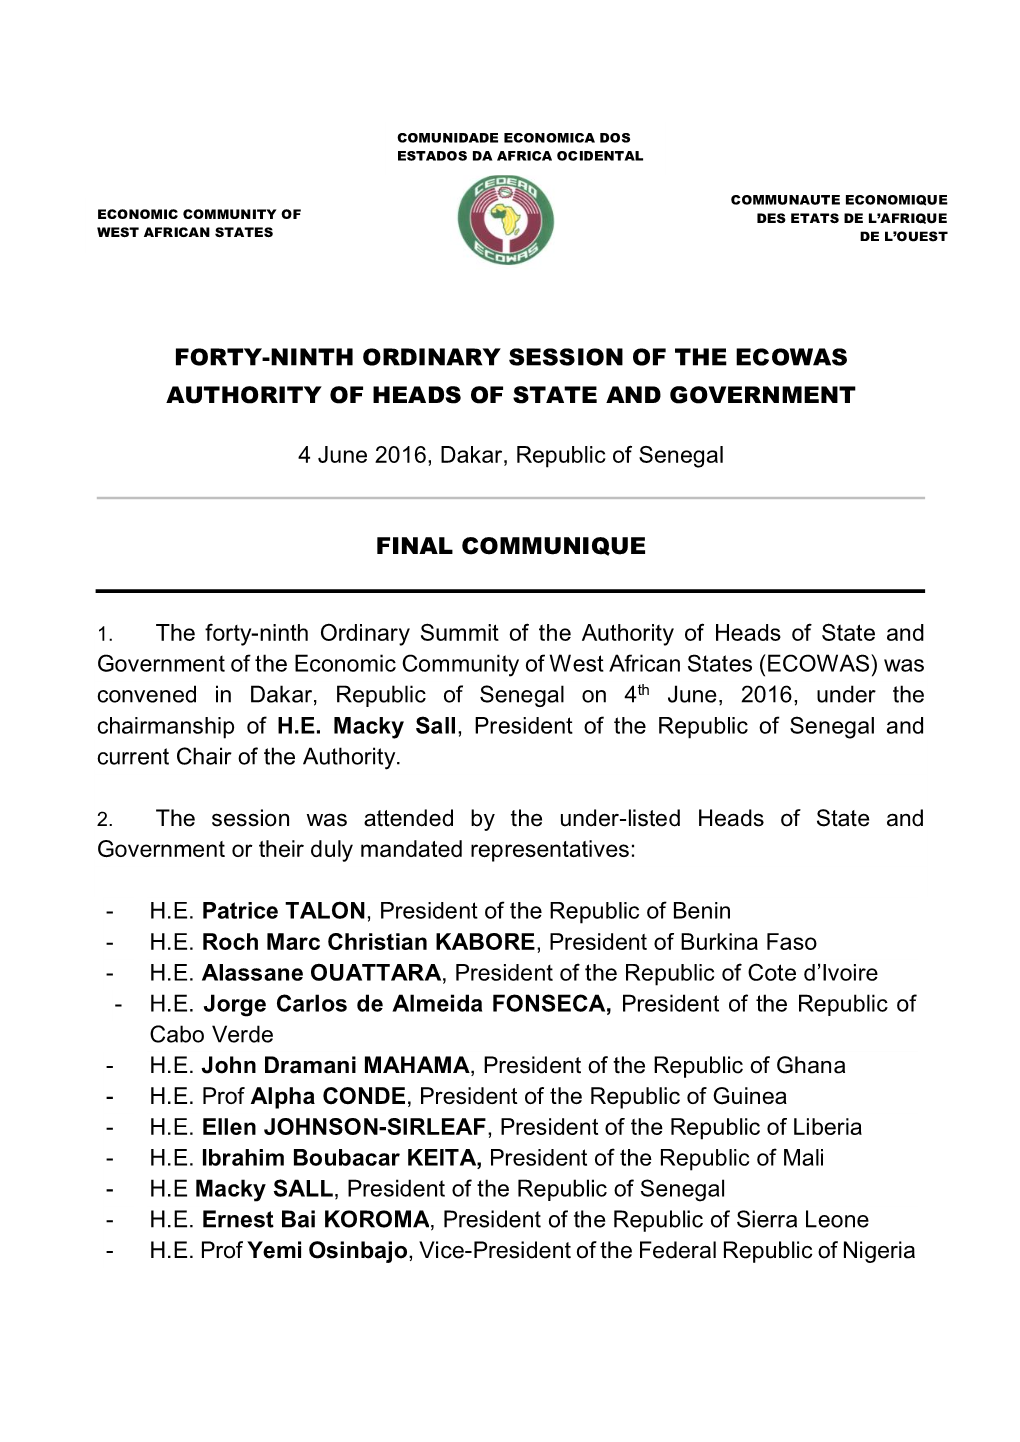 Forty-Ninth Ordinary Session of the Ecowas Authority of Heads of State and Government